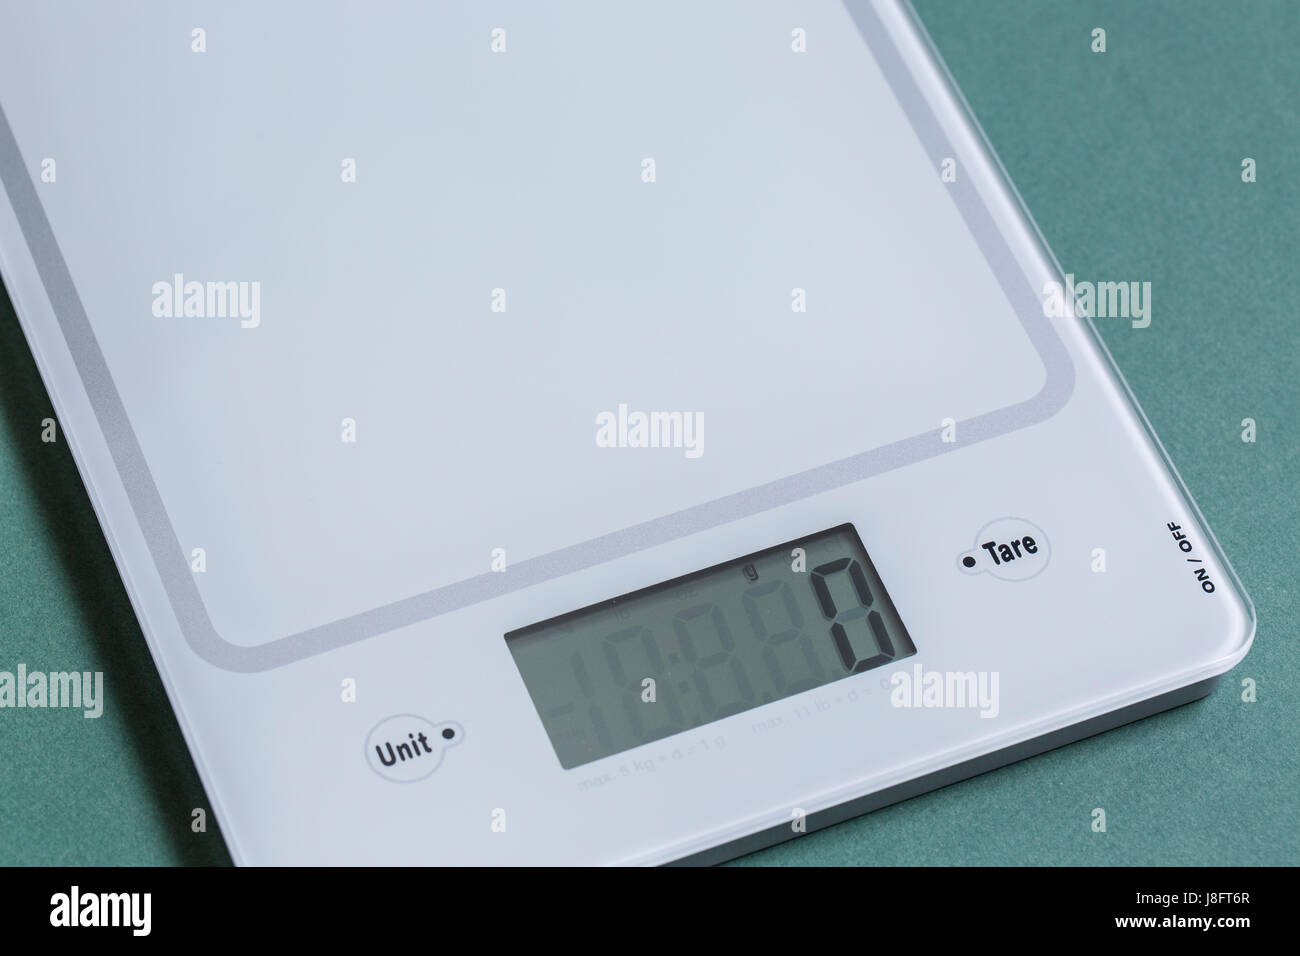 Empty digital kitchen scale on green paper background. Stock Photo